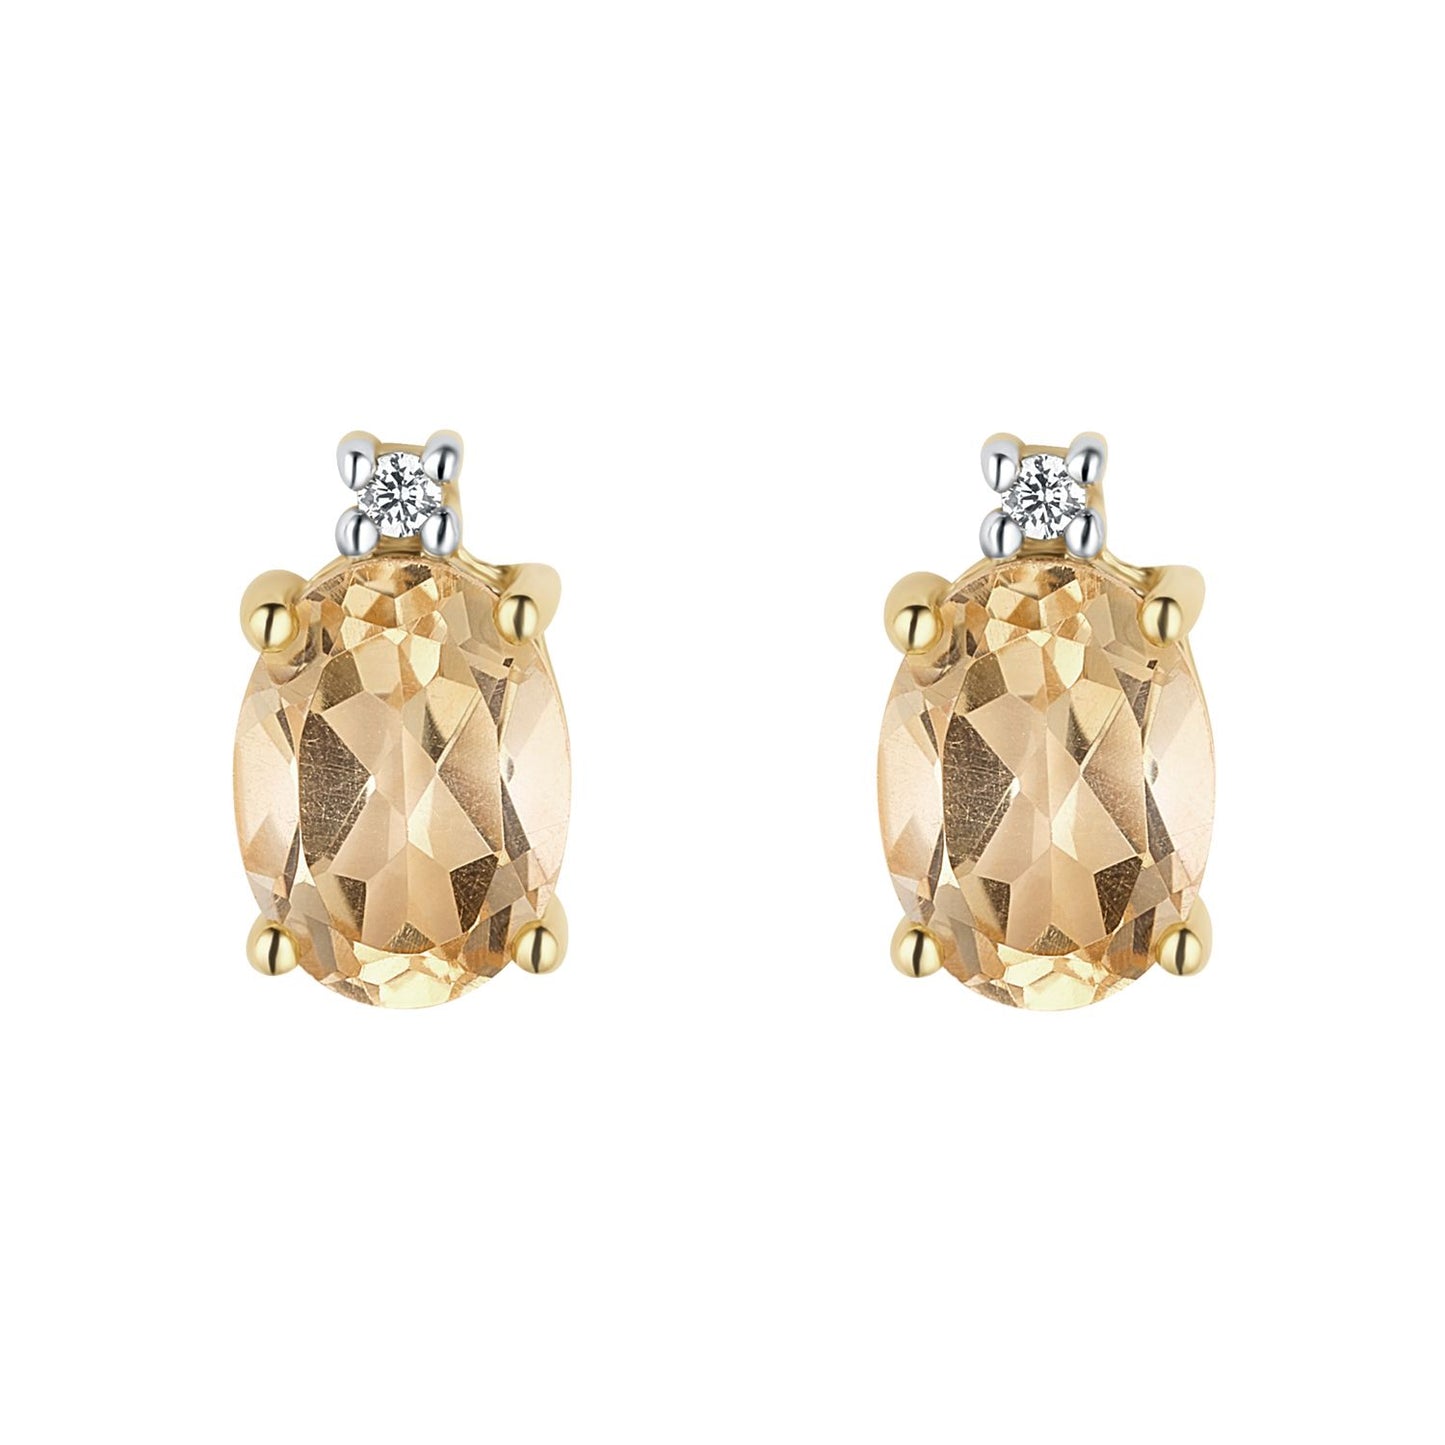 9ct Gold Oval Cubic Zirconia And Citrine Stud Earring